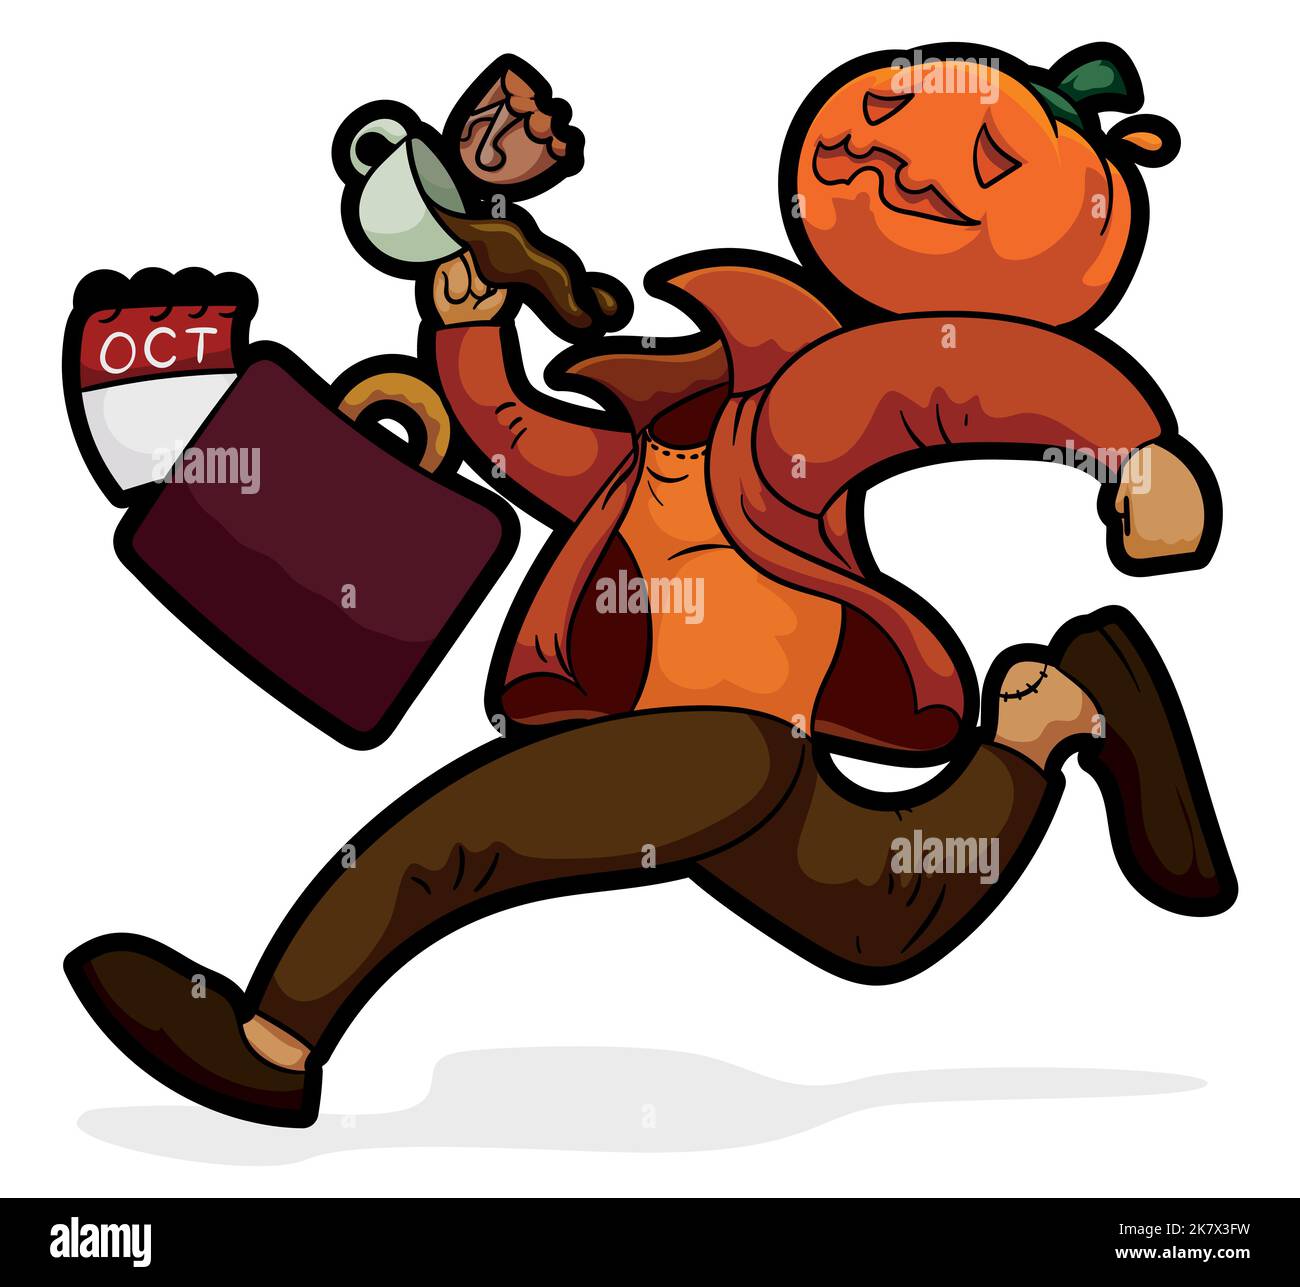 Headless Jack-O-Lantern scurrying to be on time to October celebration with coffee cup, bitten bread and opened suitcase. Stock Vector